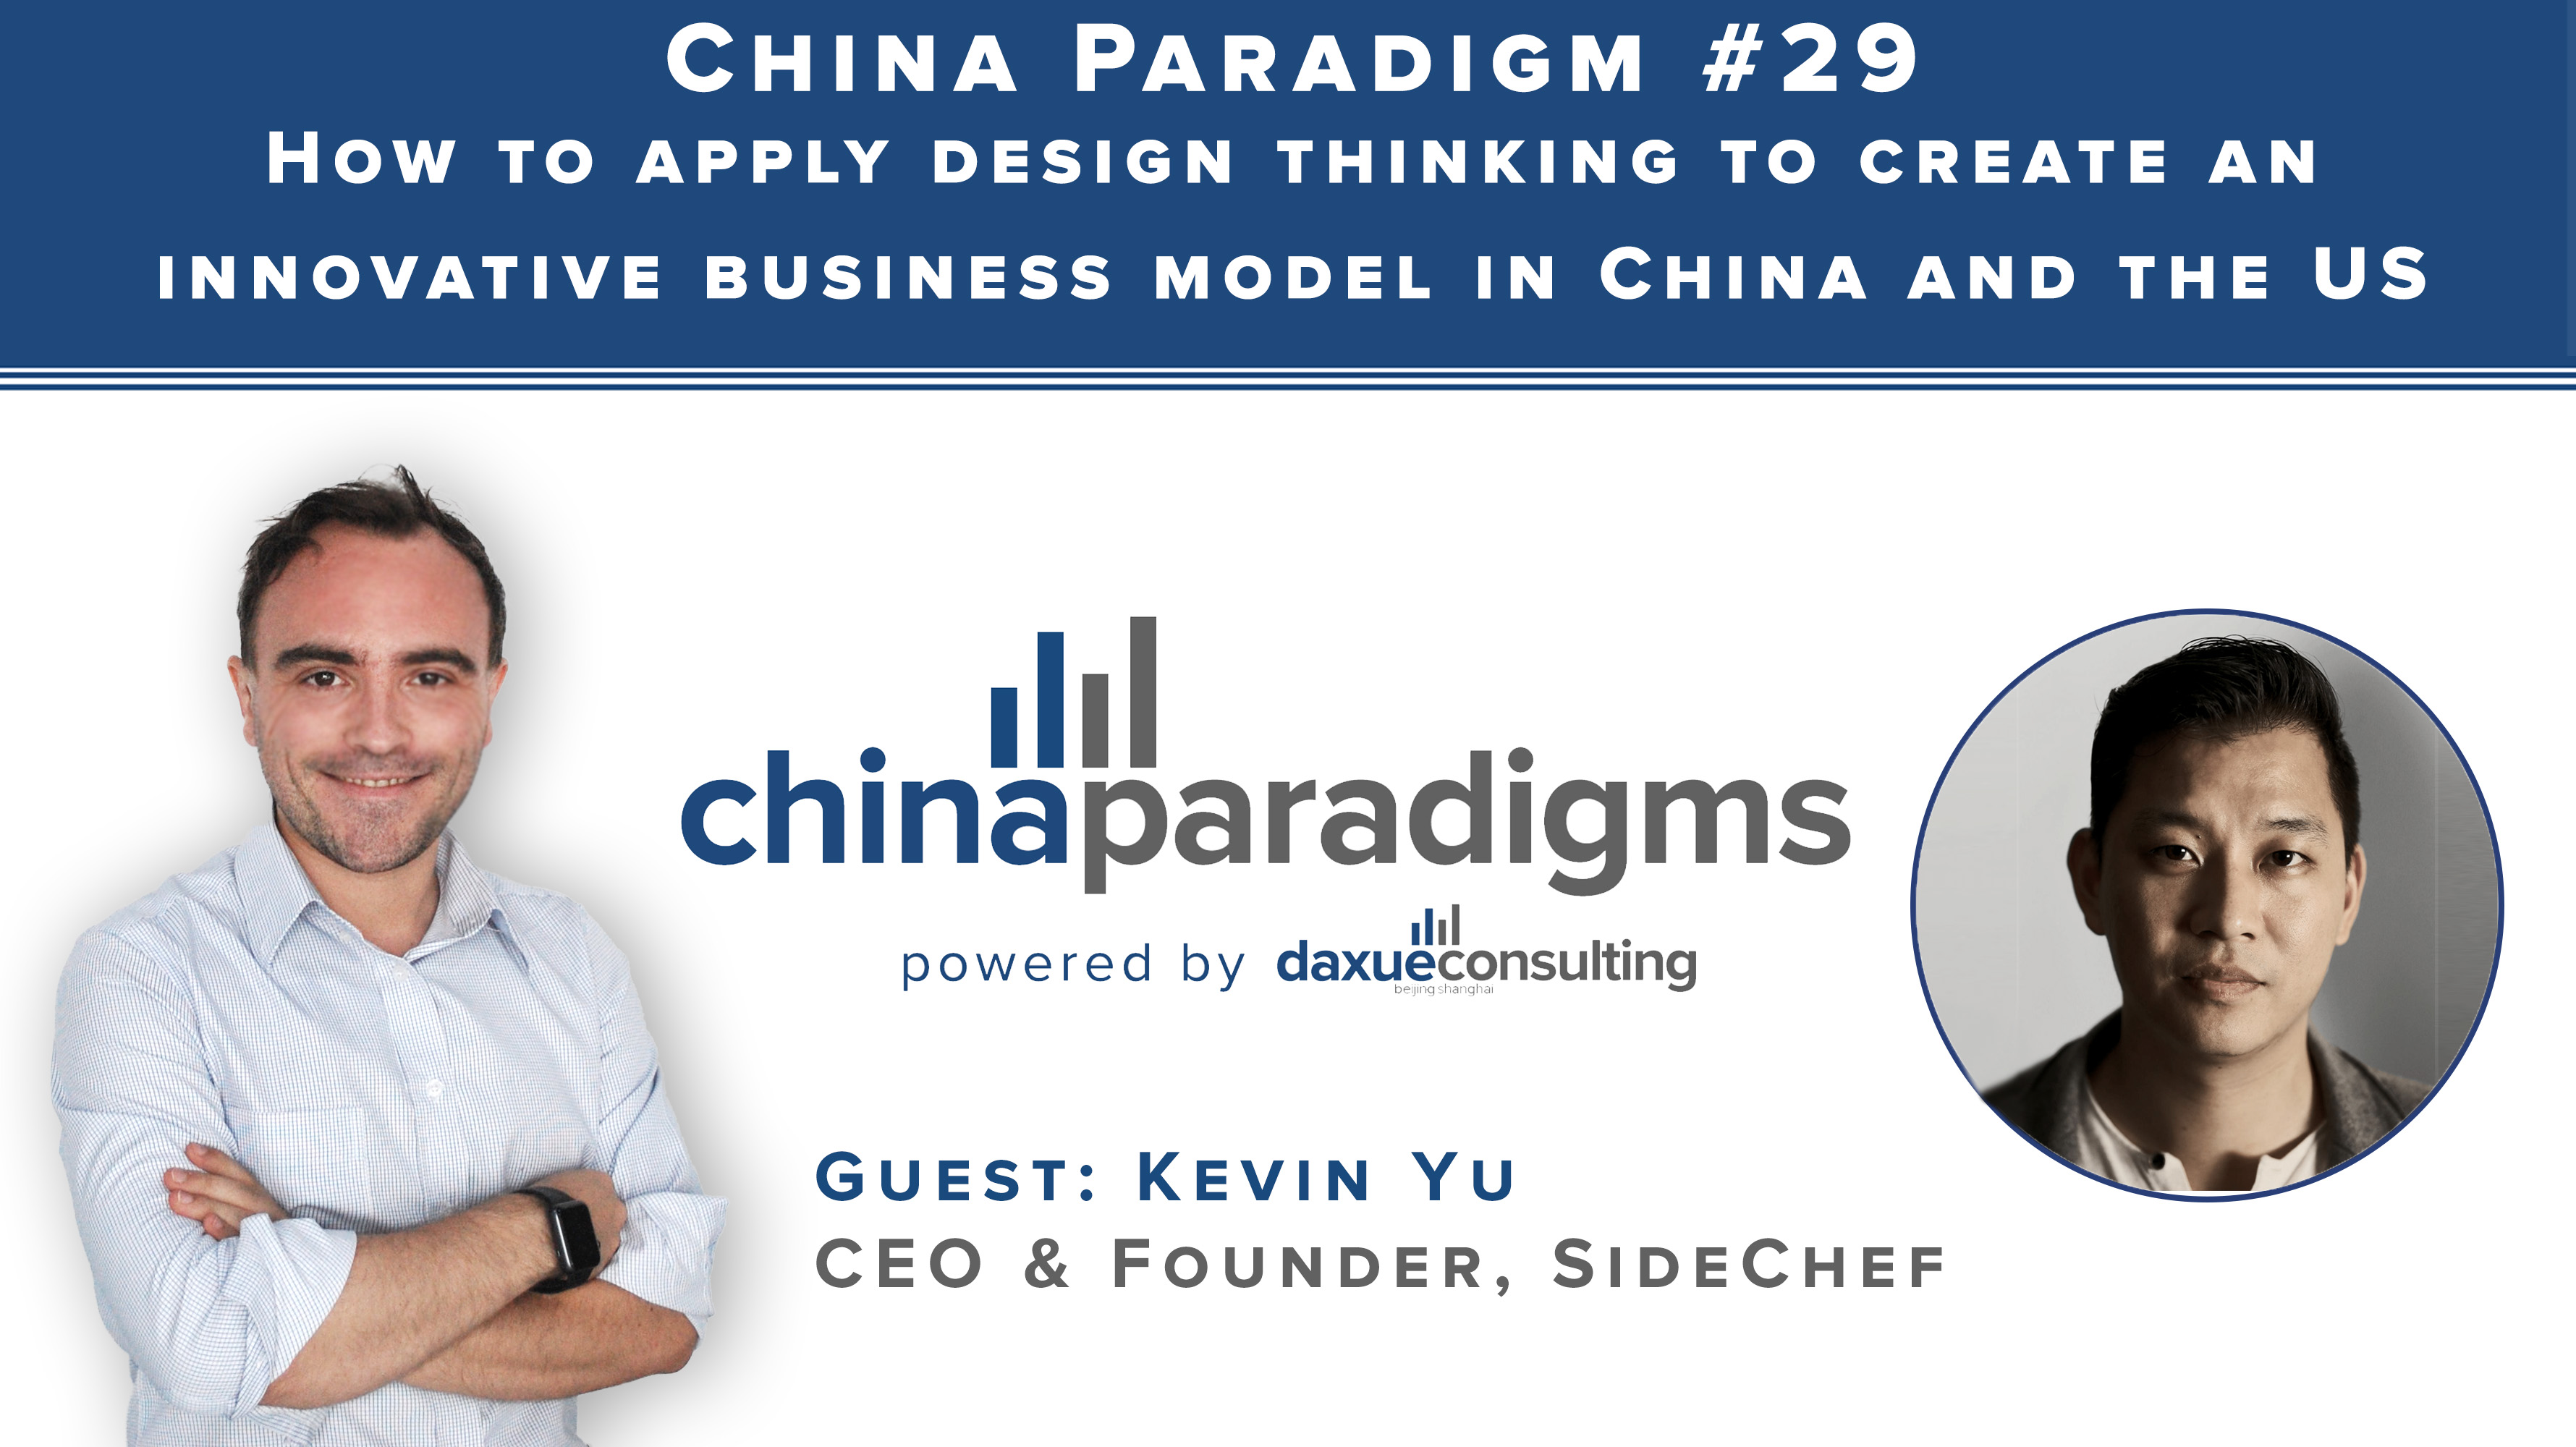 [Podcast] China Paradigm #29: How to apply design thinking to an APP in China